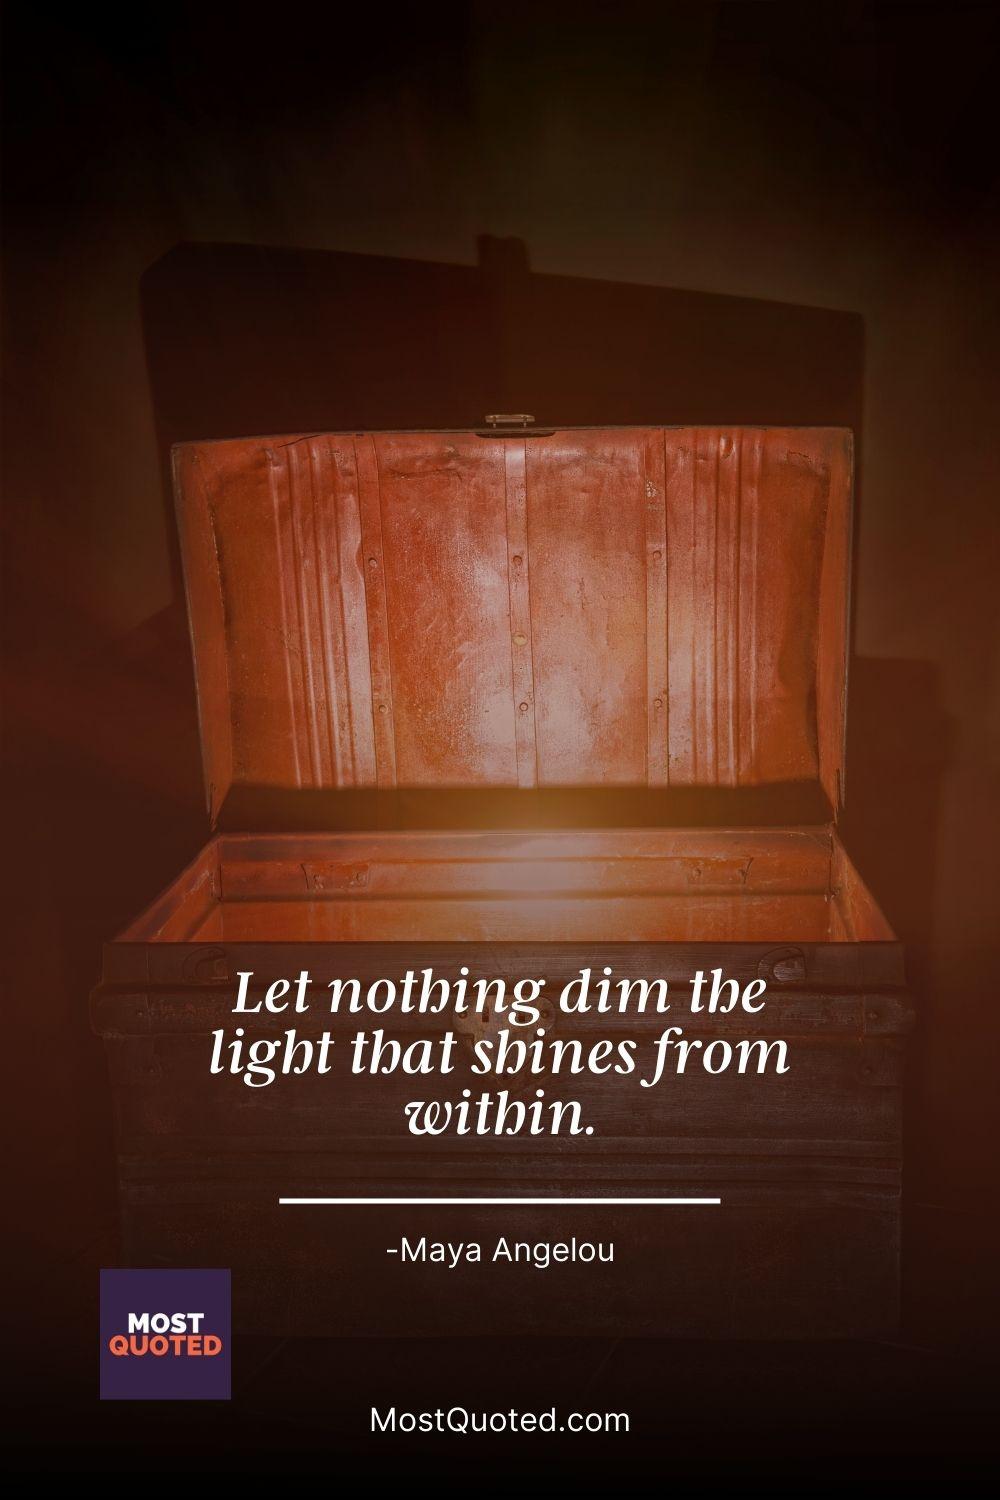 Let nothing dim the light that shines from within. - Maya Angelou